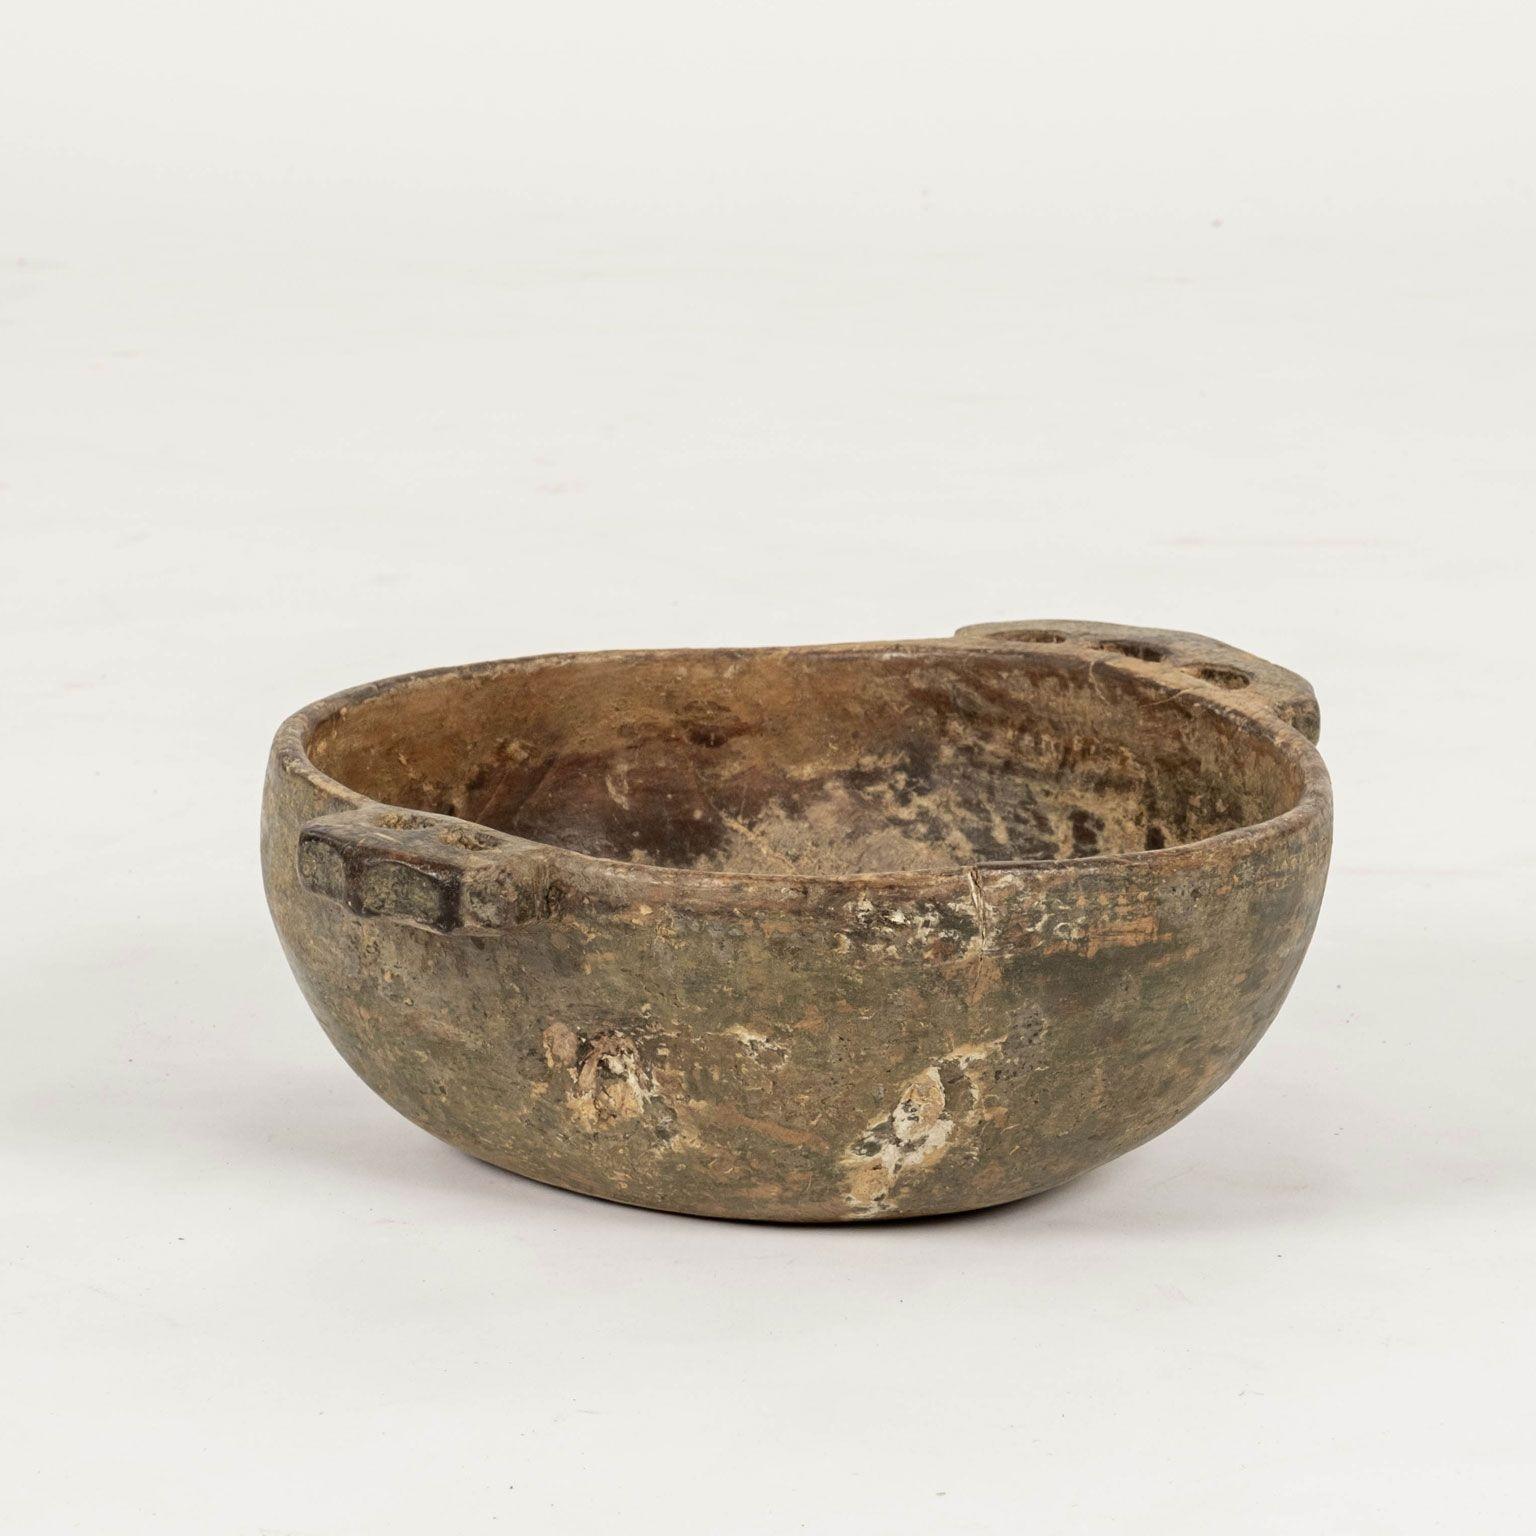 18th century green-painted primitive Swedish root wood bowl with handles. Hand-carved from burl root wood. Interior retains early brown-ocher paint, and exterior of bowl is scraped back revealing early green paint. Inscribed on bottom with initials